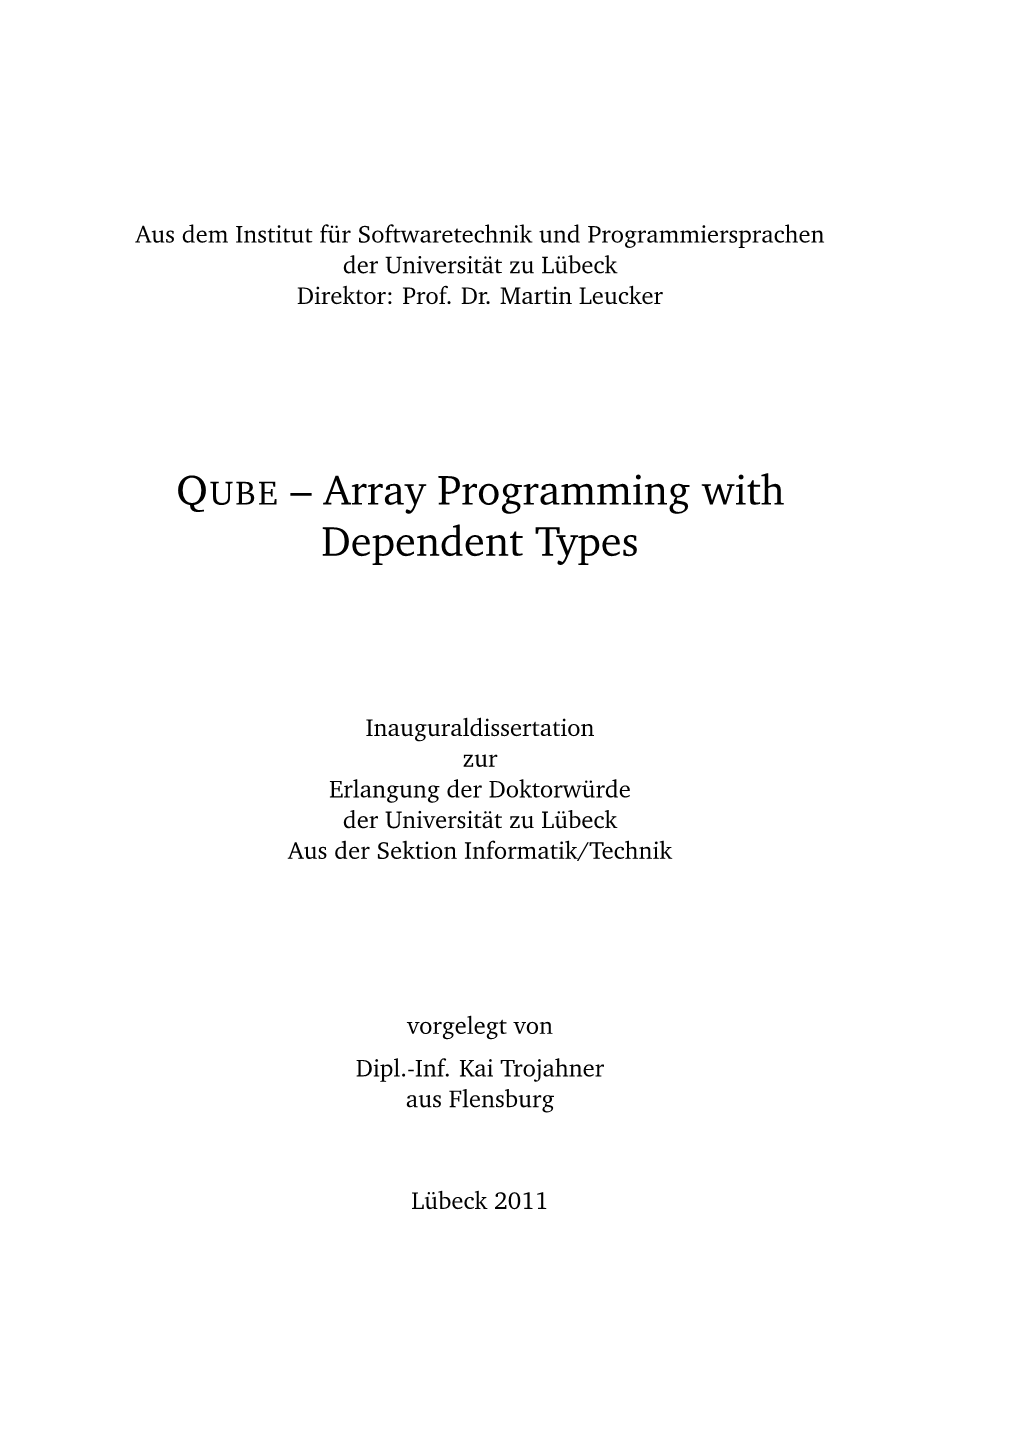 QUBE – Array Programming with Dependent Types